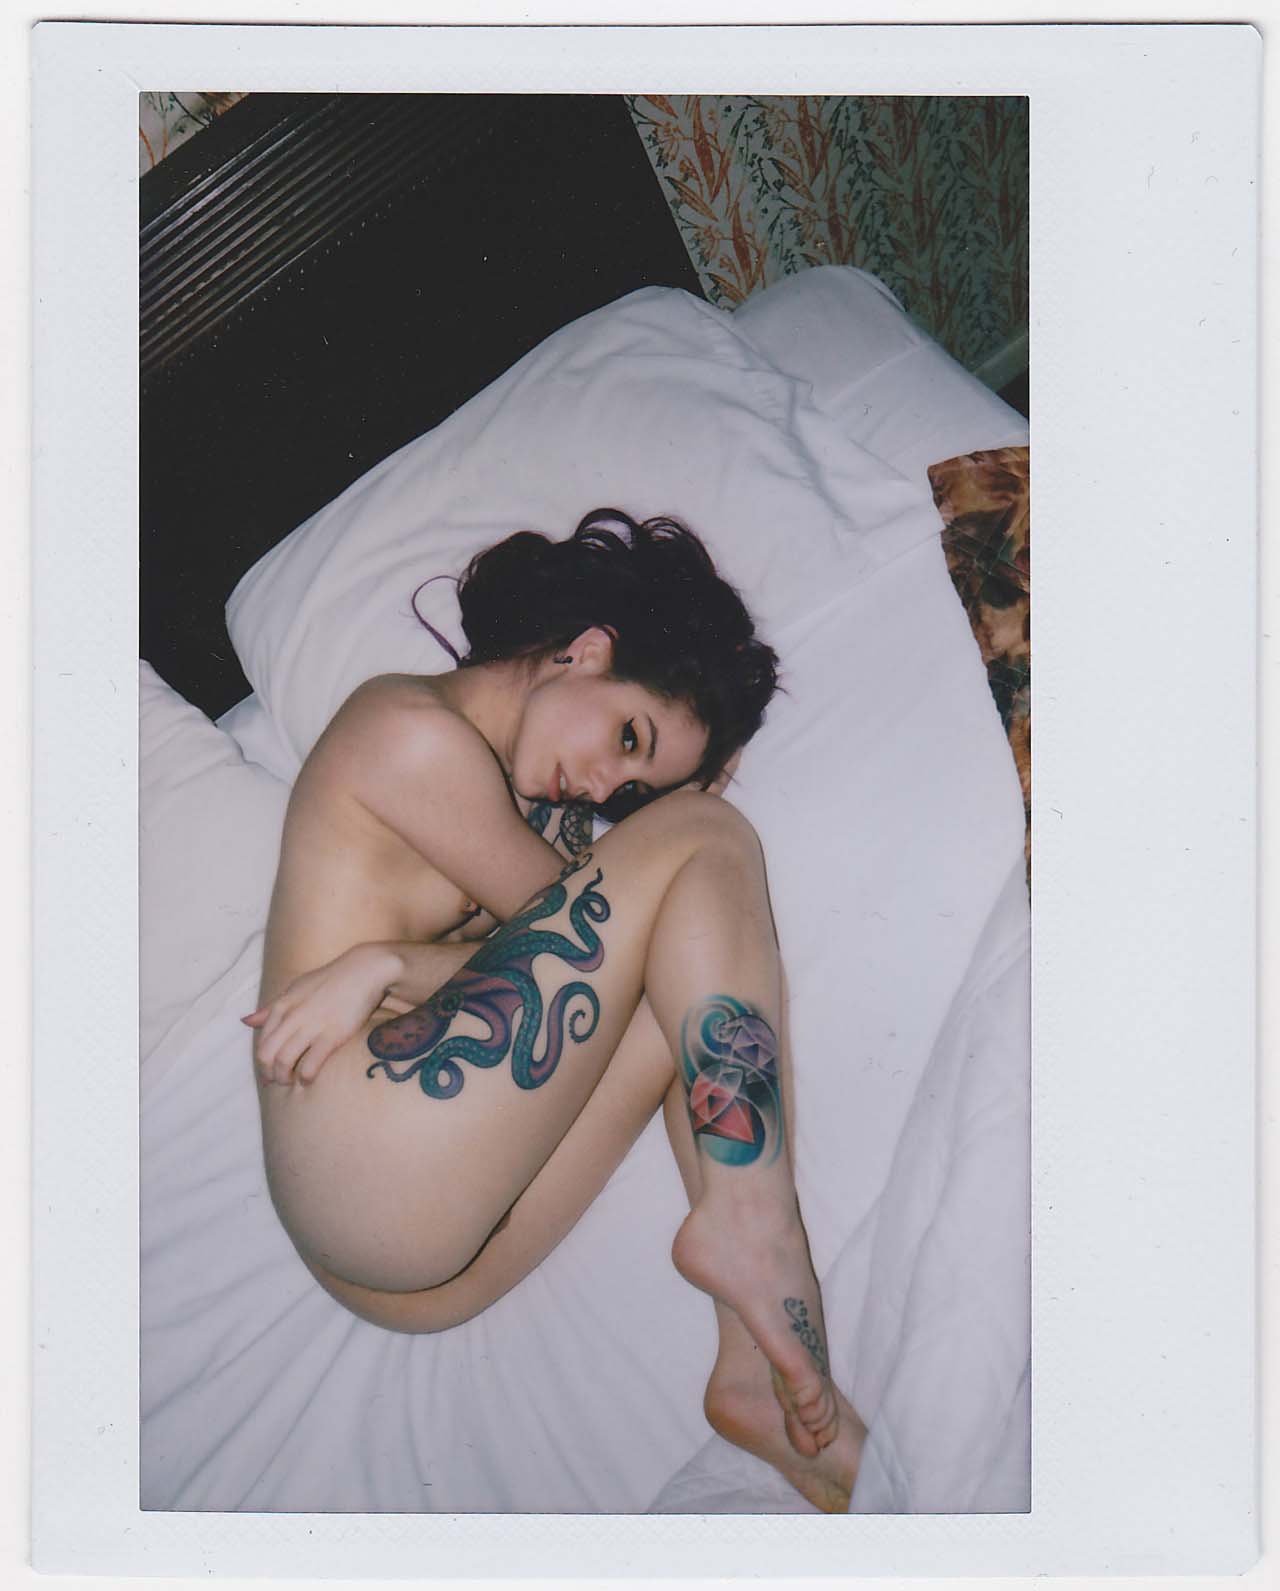 Okami Suicide nude by Aphro Oner. Part of the Lust Project.